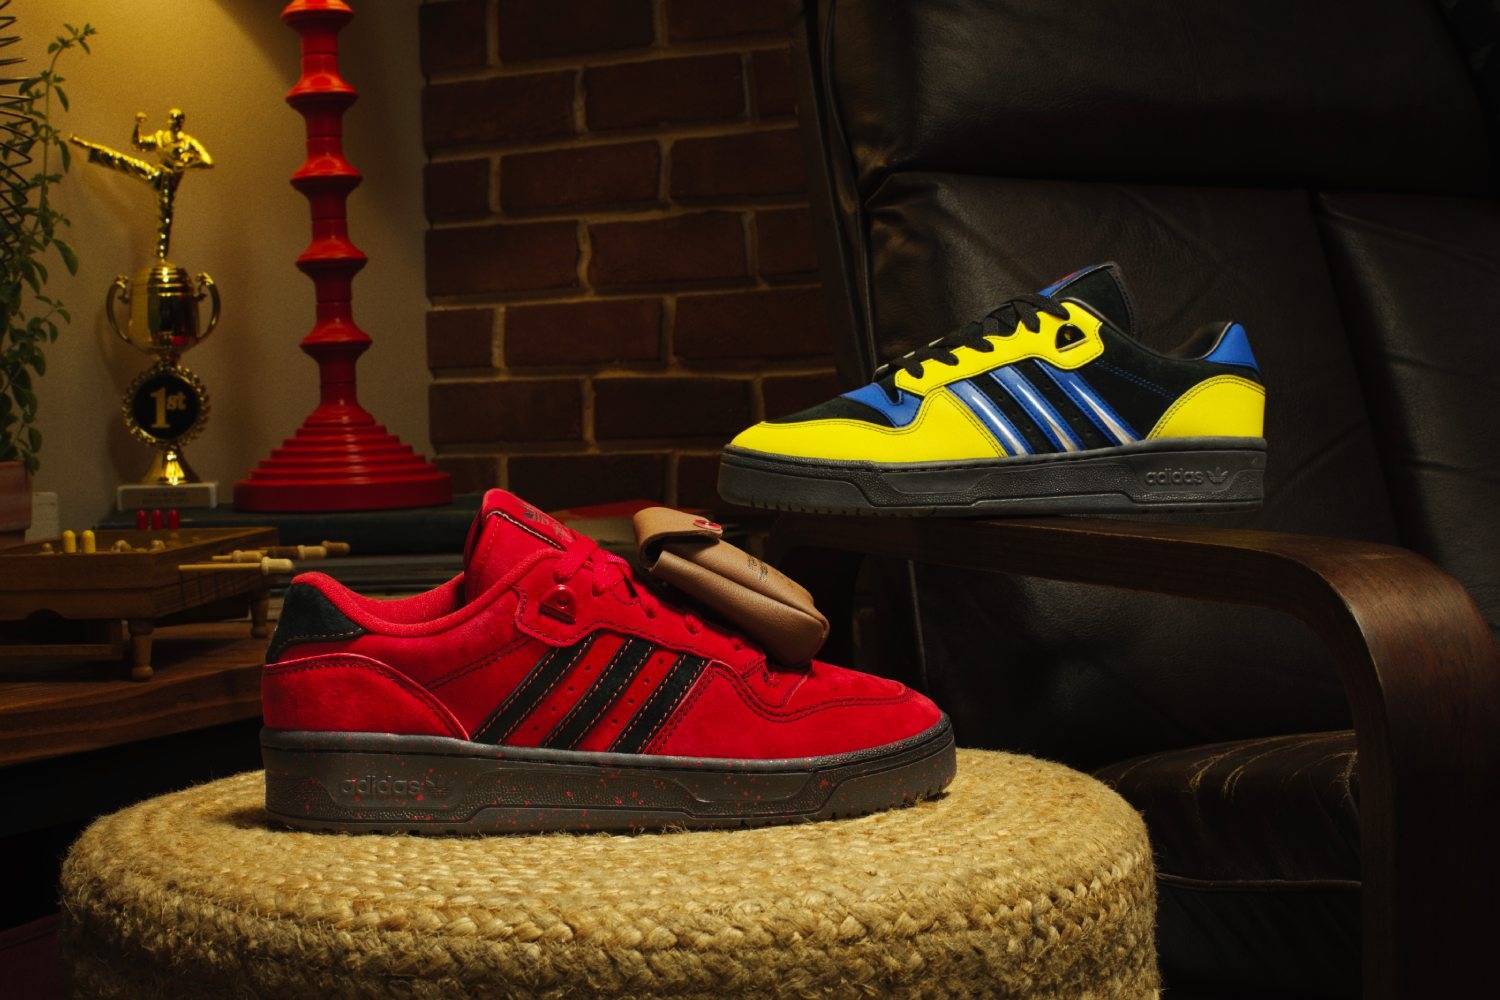 Deadpool &amp; Wolverine get their own adidas collection